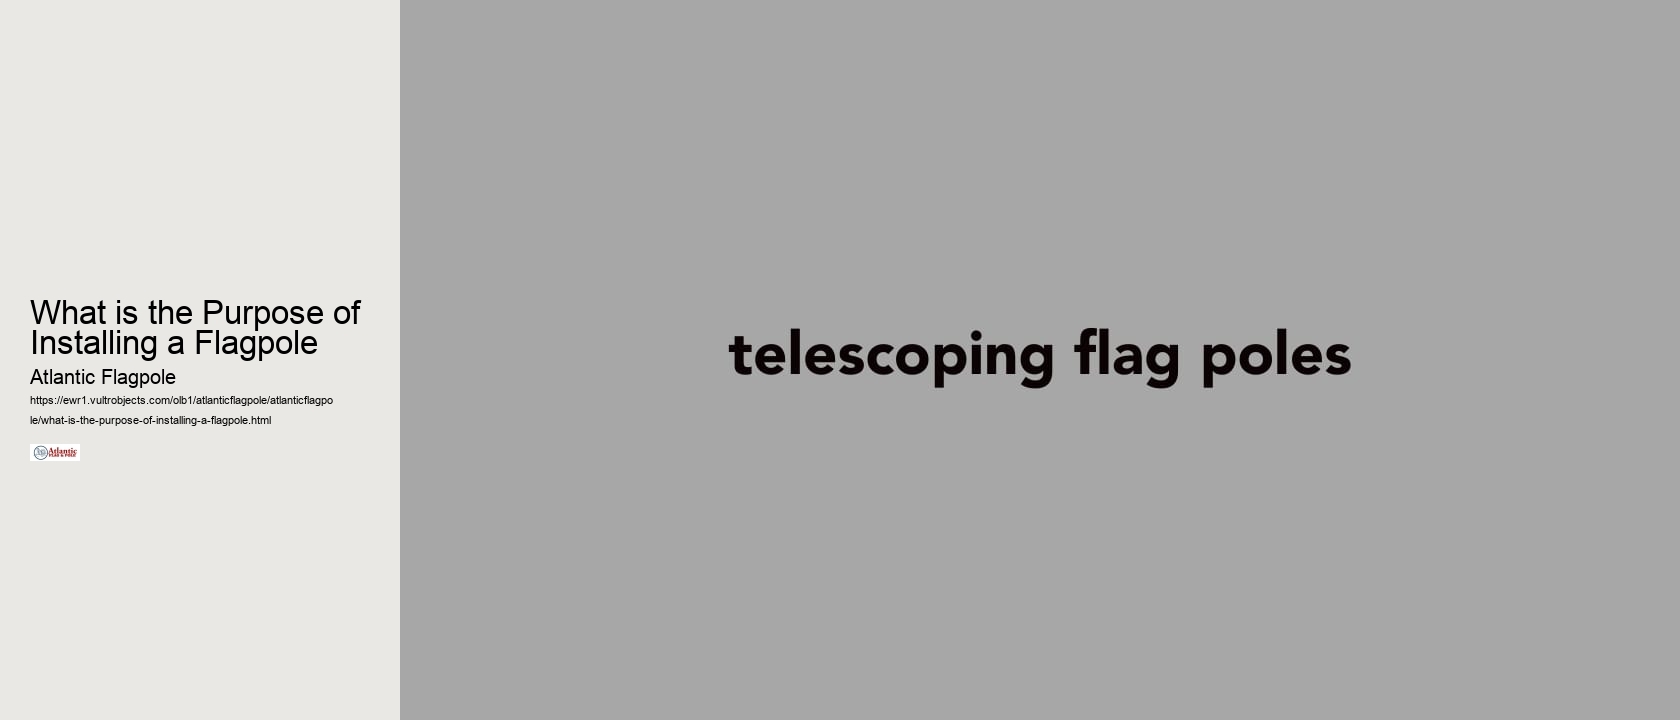 What is the Purpose of Installing a Flagpole